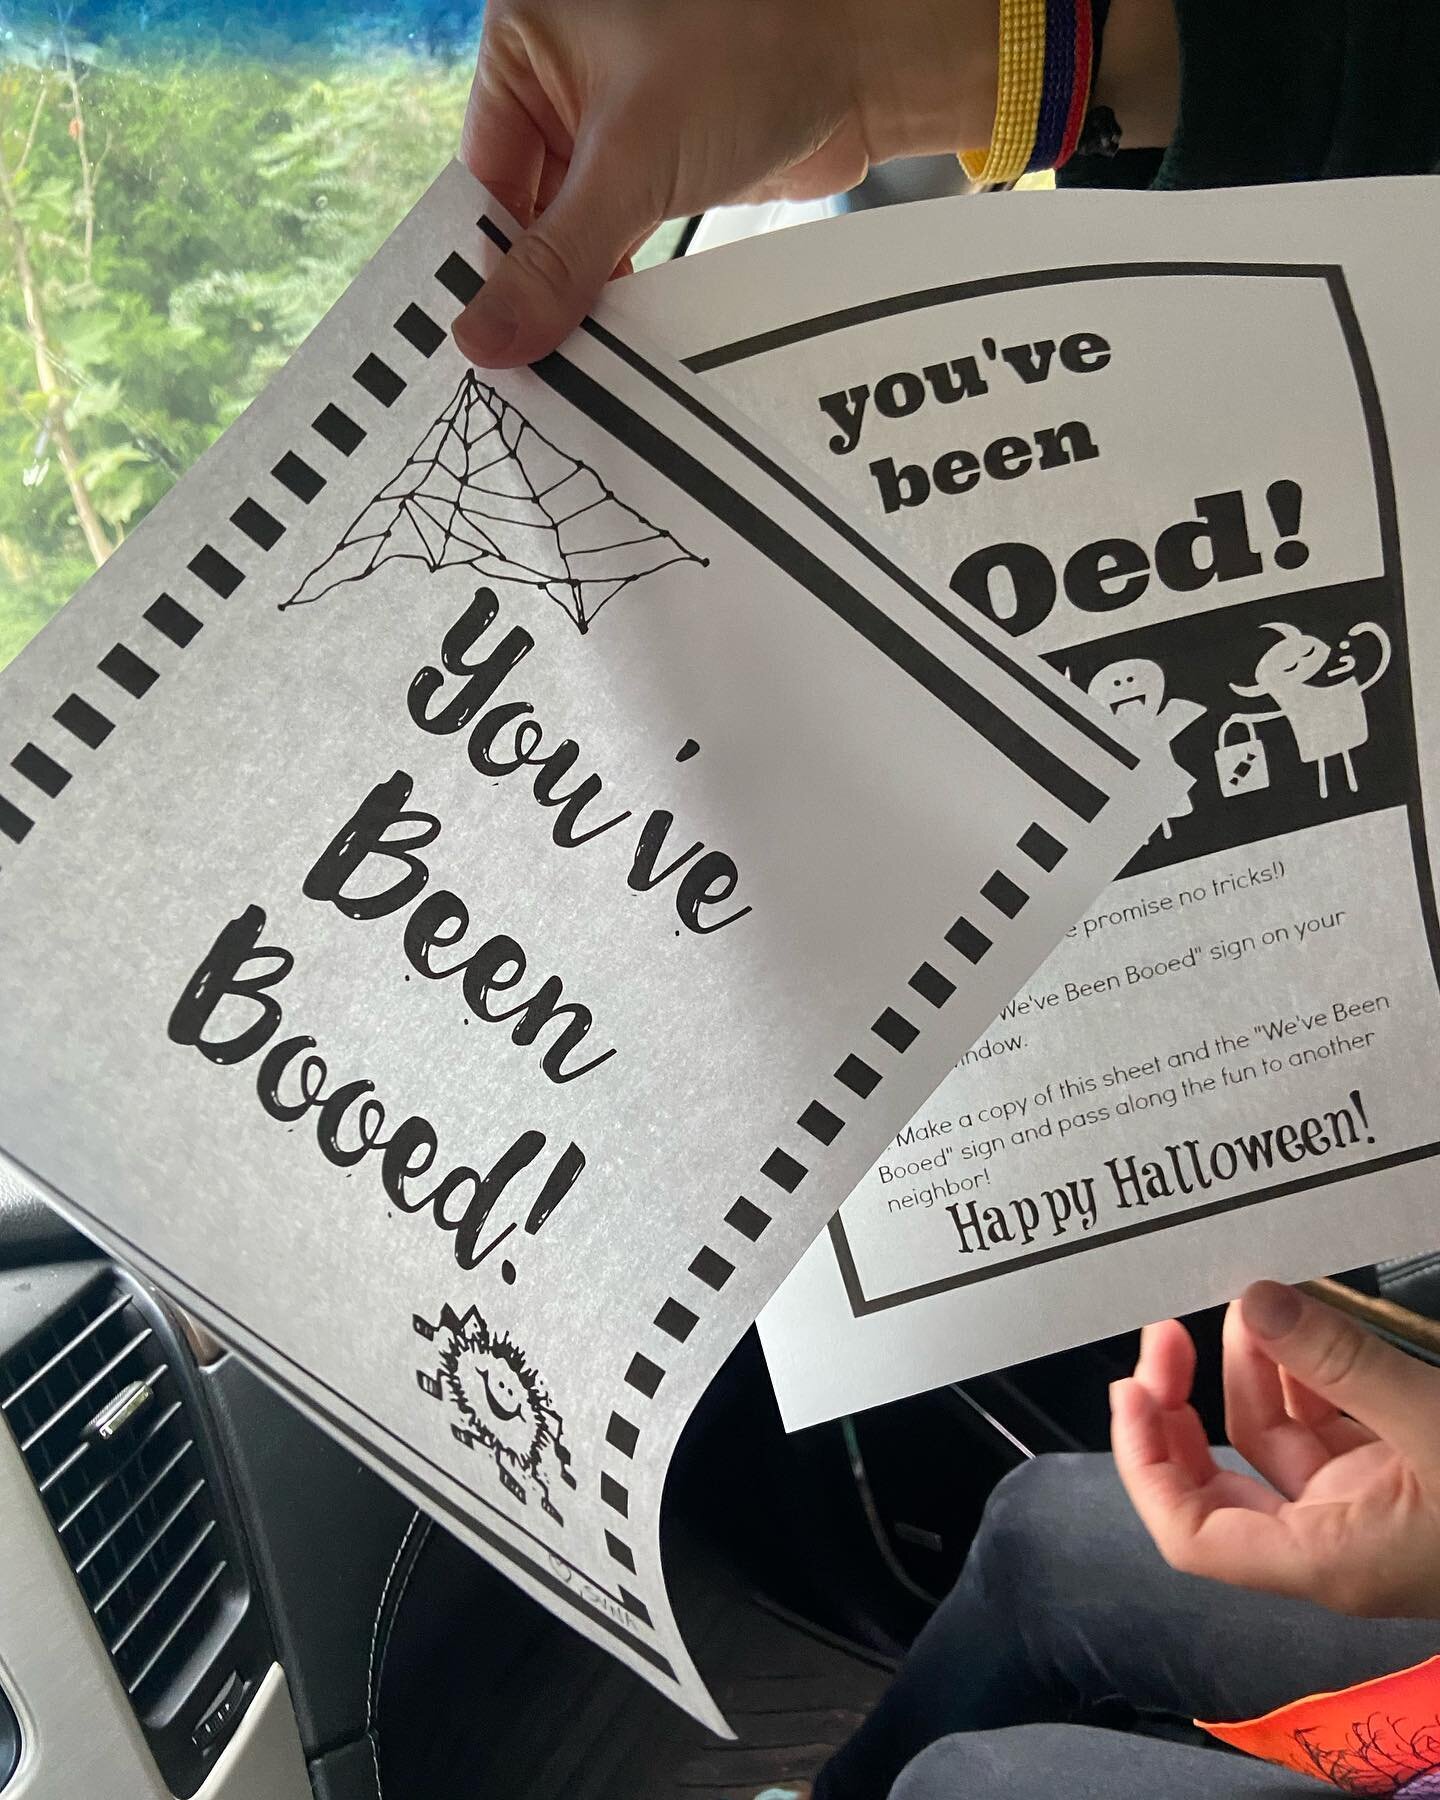 SVNA kiddos were just out &ldquo;BOOing&rdquo; again so beware! Don&rsquo;t forget to pin your sign on the door so you aren&rsquo;t hit twice and pass it on! #svnadc #screamvalley #youvebeenbooed